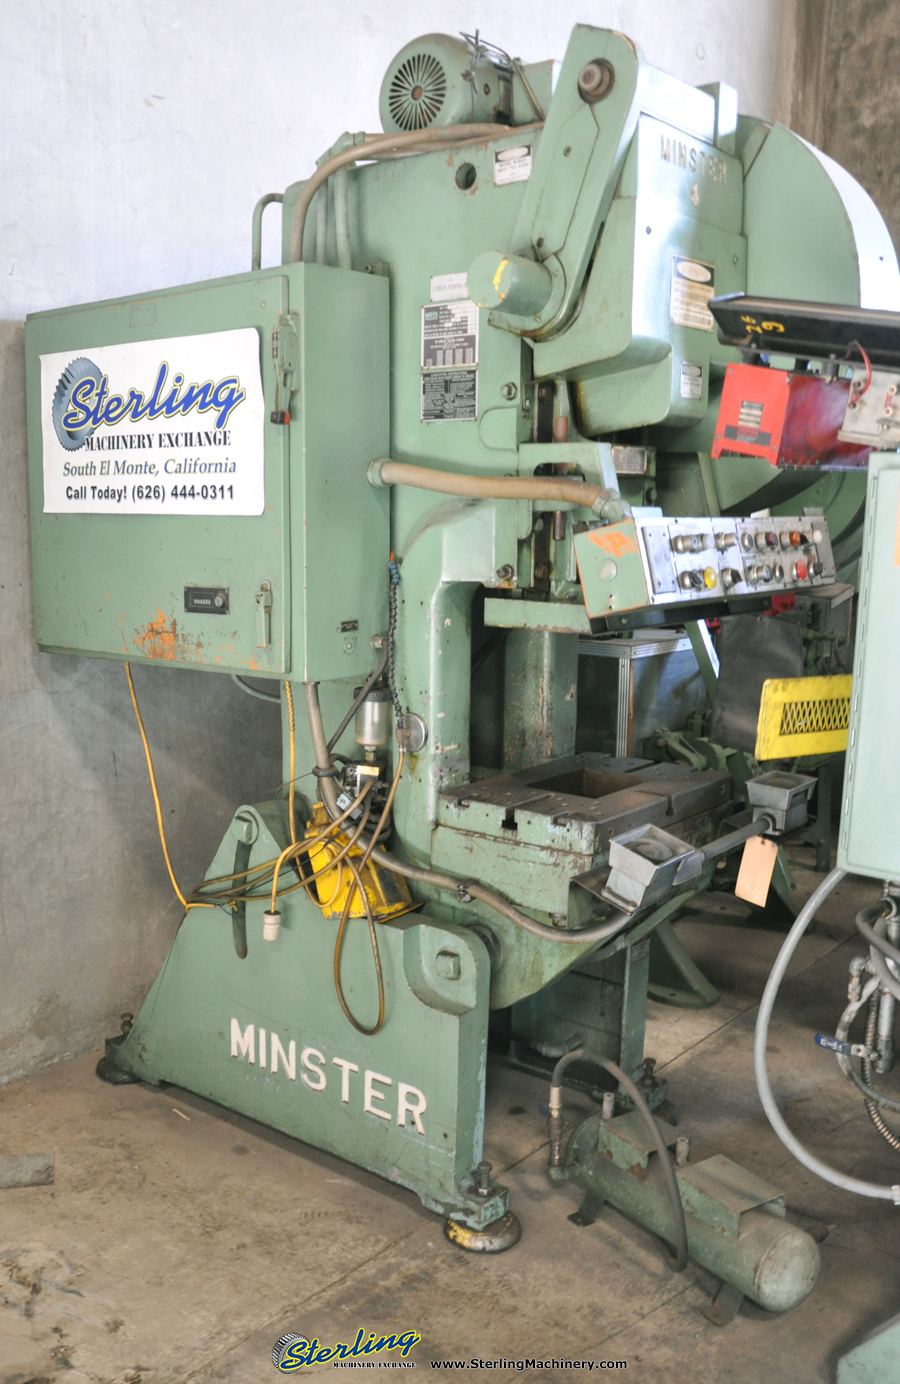 Minster-32 Ton x 4" Used Minster OBI Press, Mdl. #4, Air Clutch & Brake, 24" x 15" x 2 1/2" Bolster Plate, Dual Palm Control, Foot Pedal, Auto Lube, Top Stop, Emergency Stop, Foot Pads, Surge Tank,  #7104-01